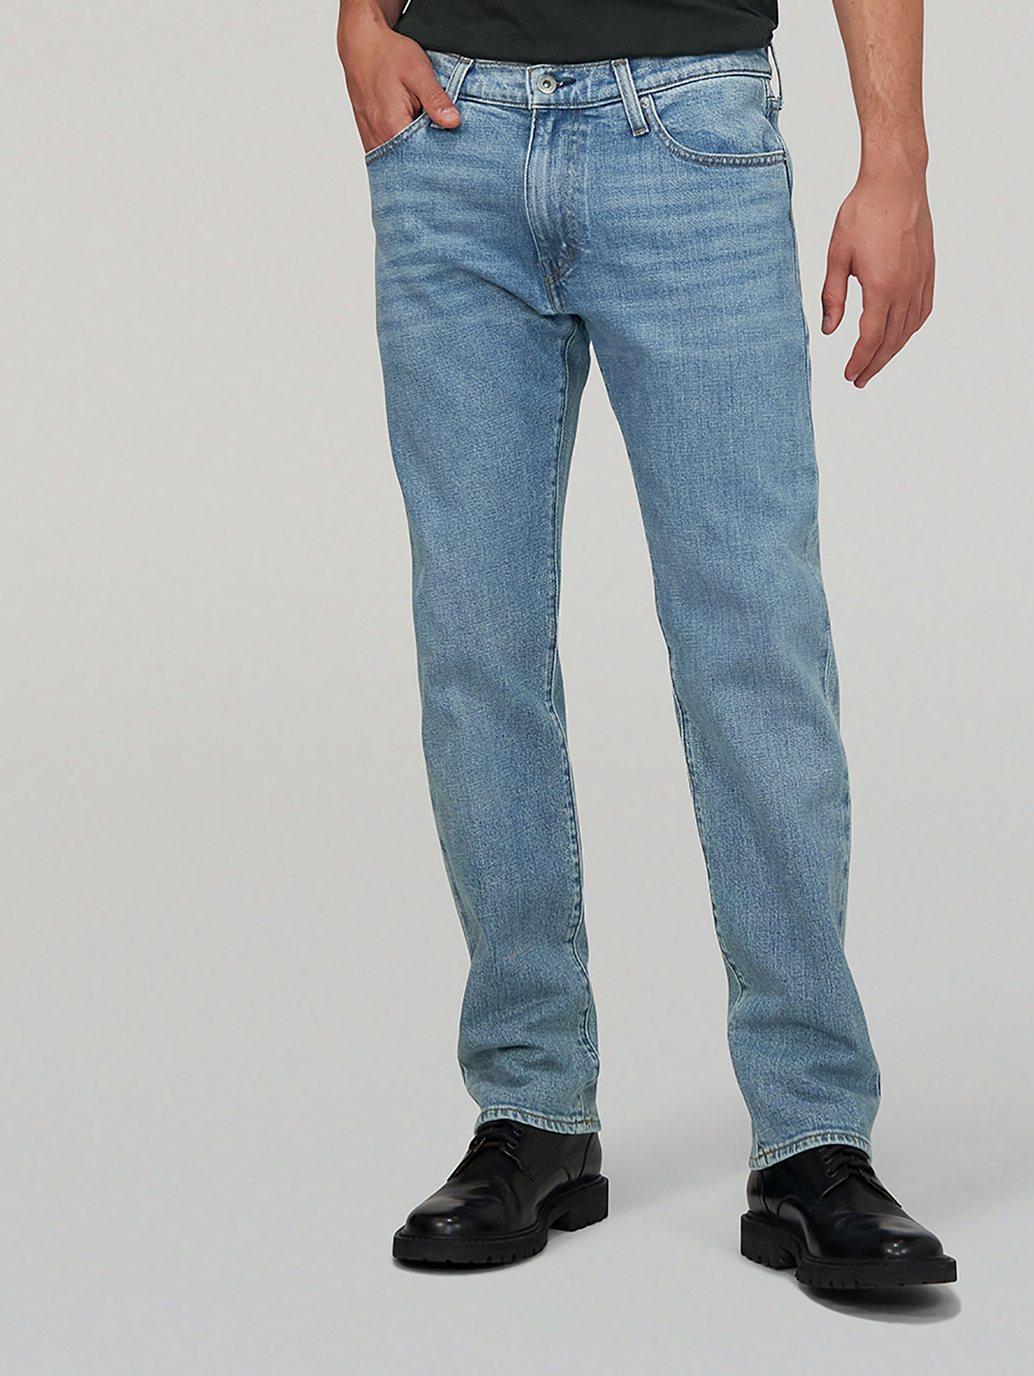 Buy Levi's® Men's Made & Crafted® 511™ Slim Fit Jeans | Levi’s ...